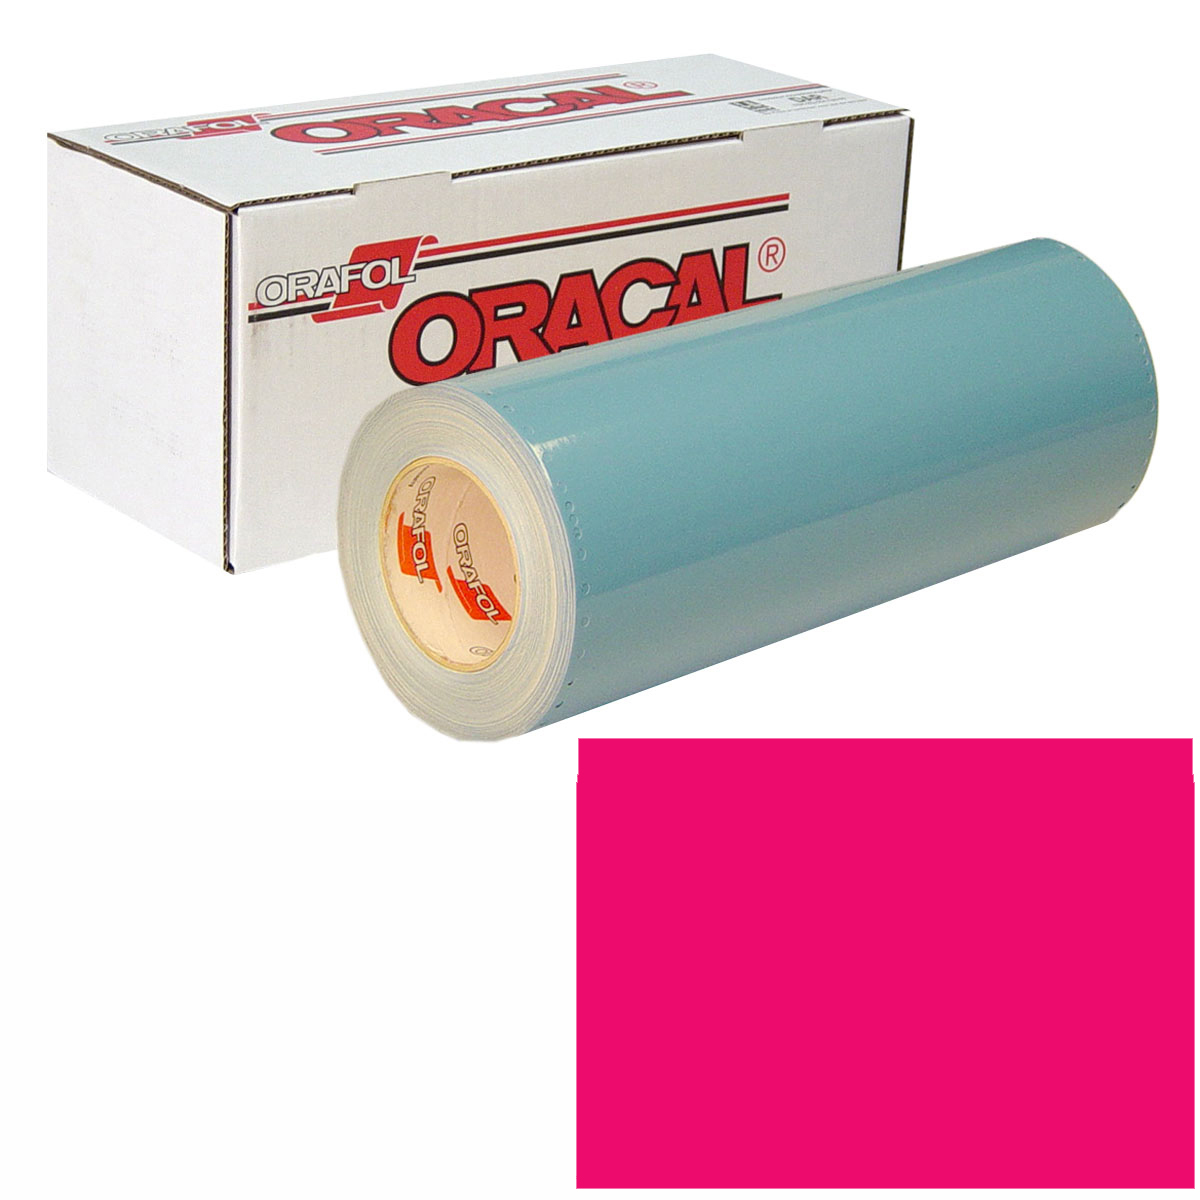 ORACAL 751 15in X 50yd 041 Pink